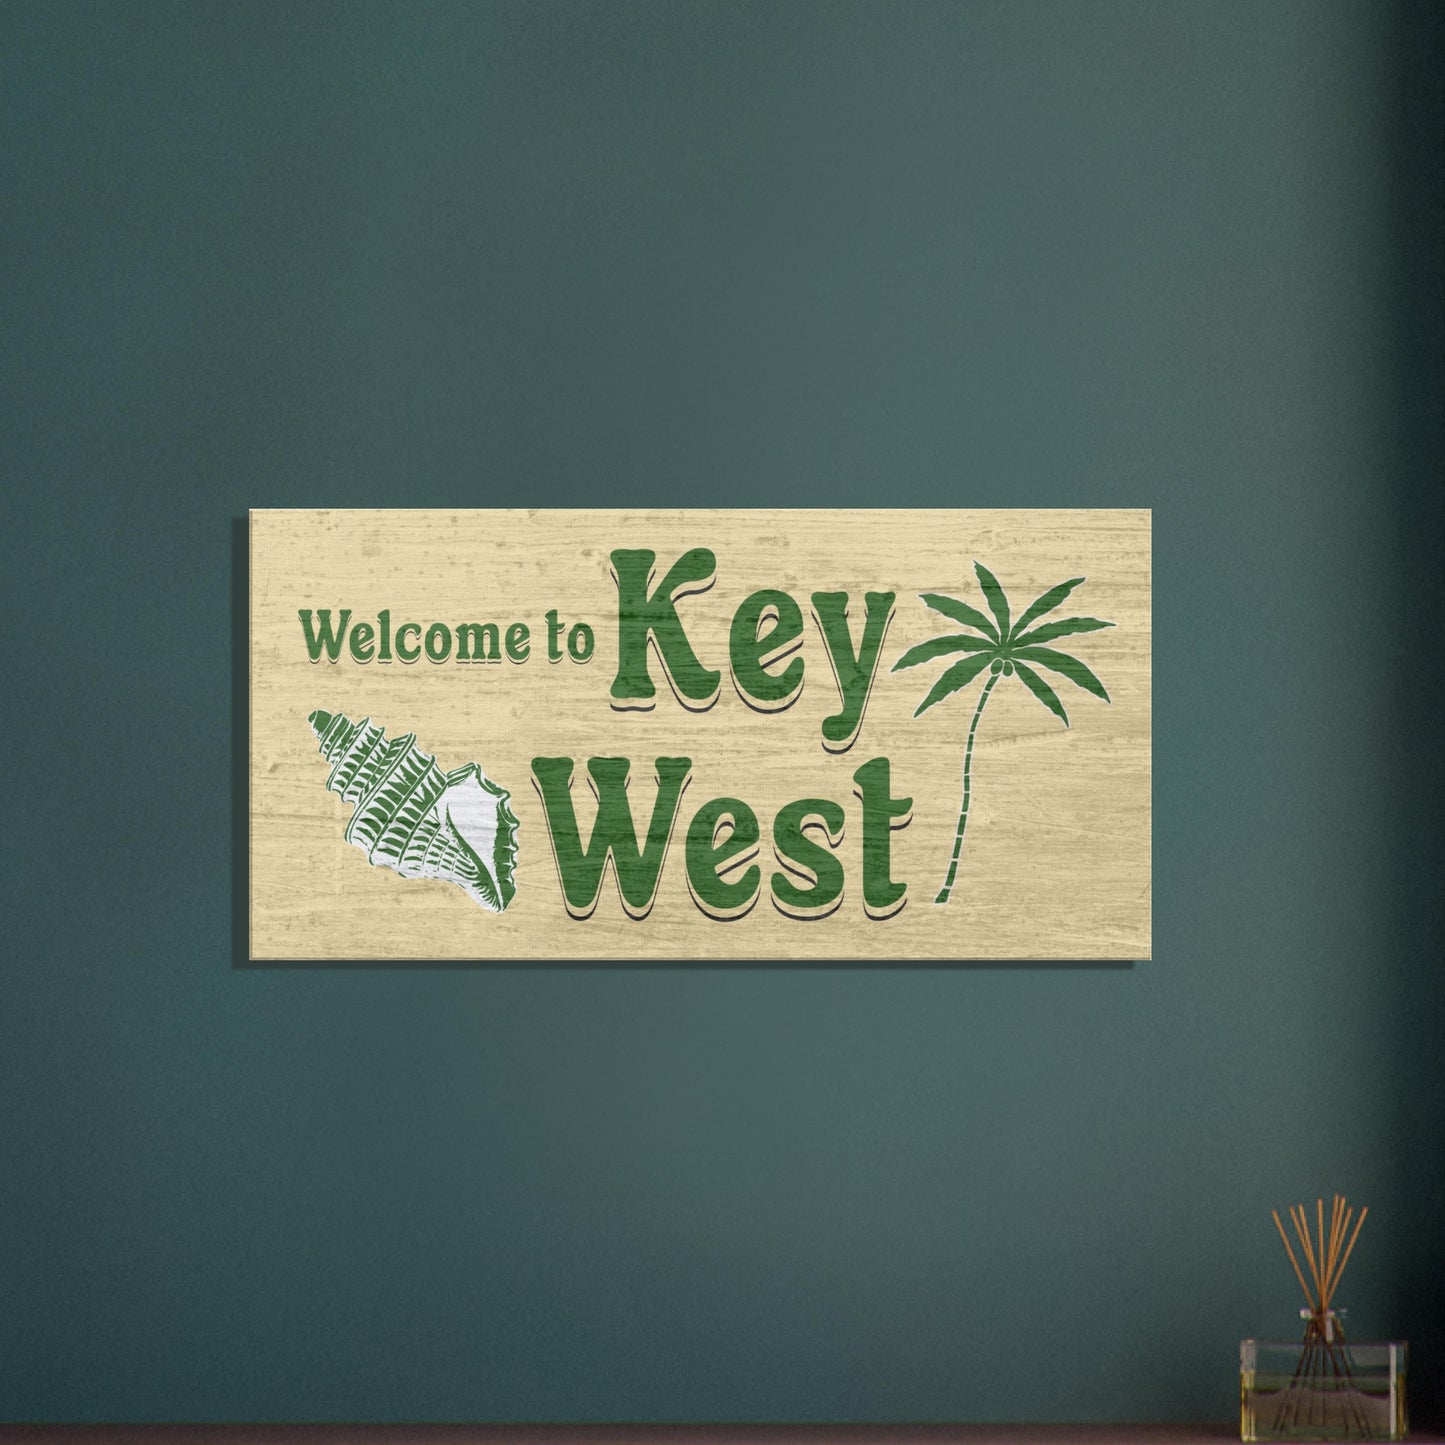 Welcome to Key West Large Canvas Wall Print - Caribbean Rays